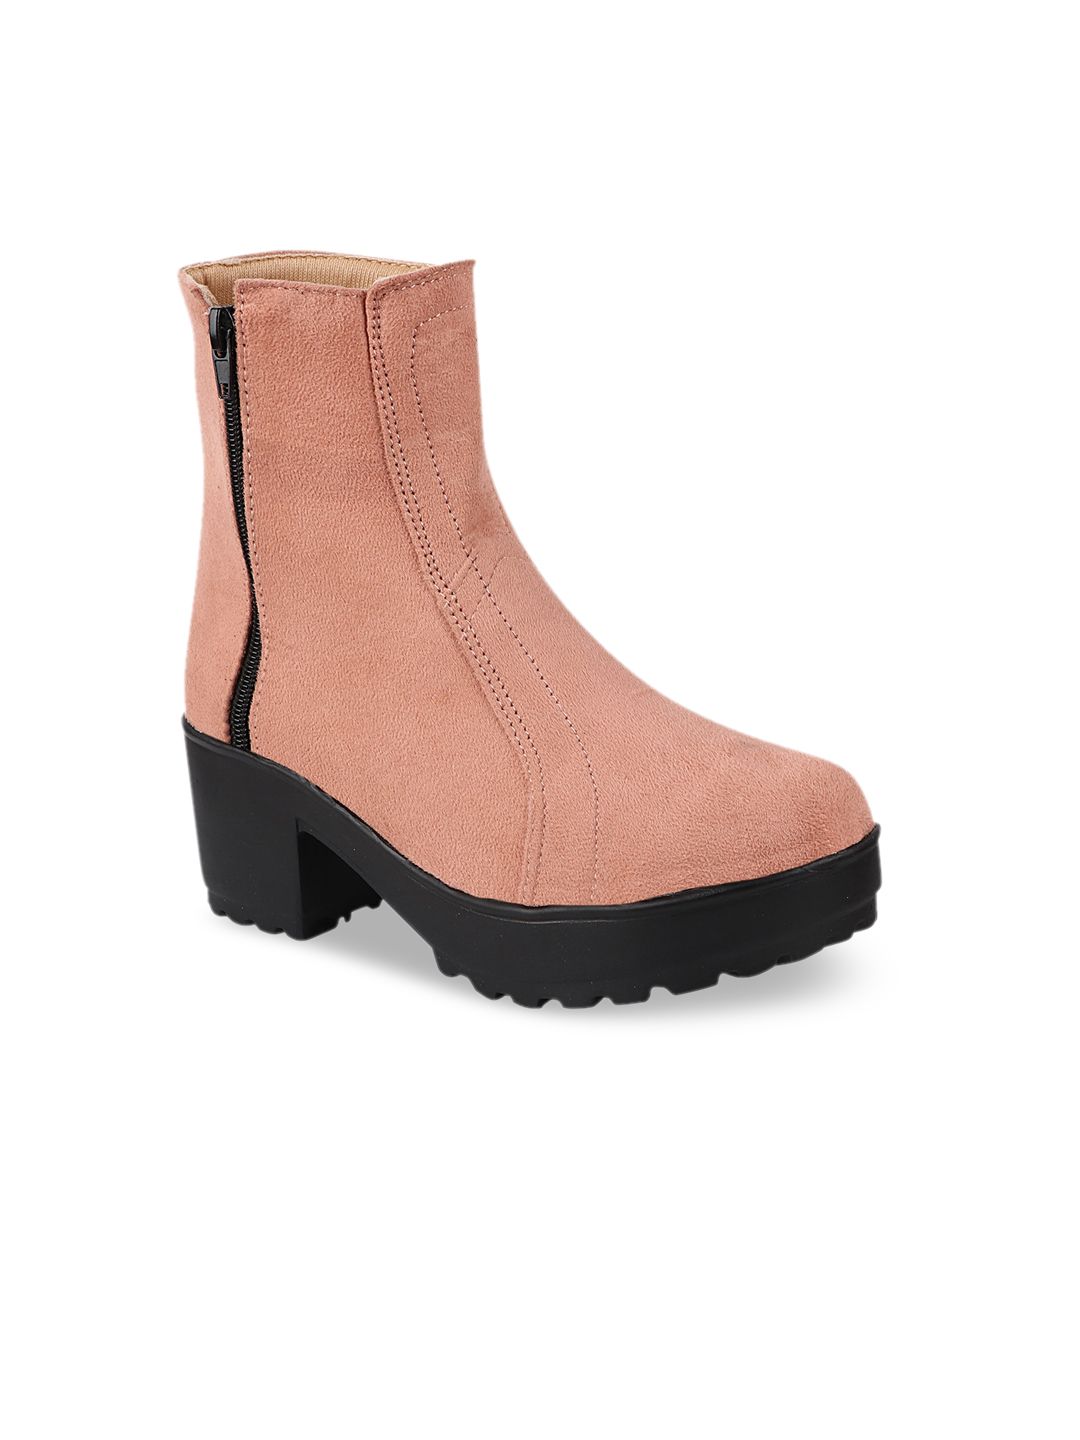 Shoetopia Women Peach-Coloured Suede High-Top Block Heeled Boots Price in India